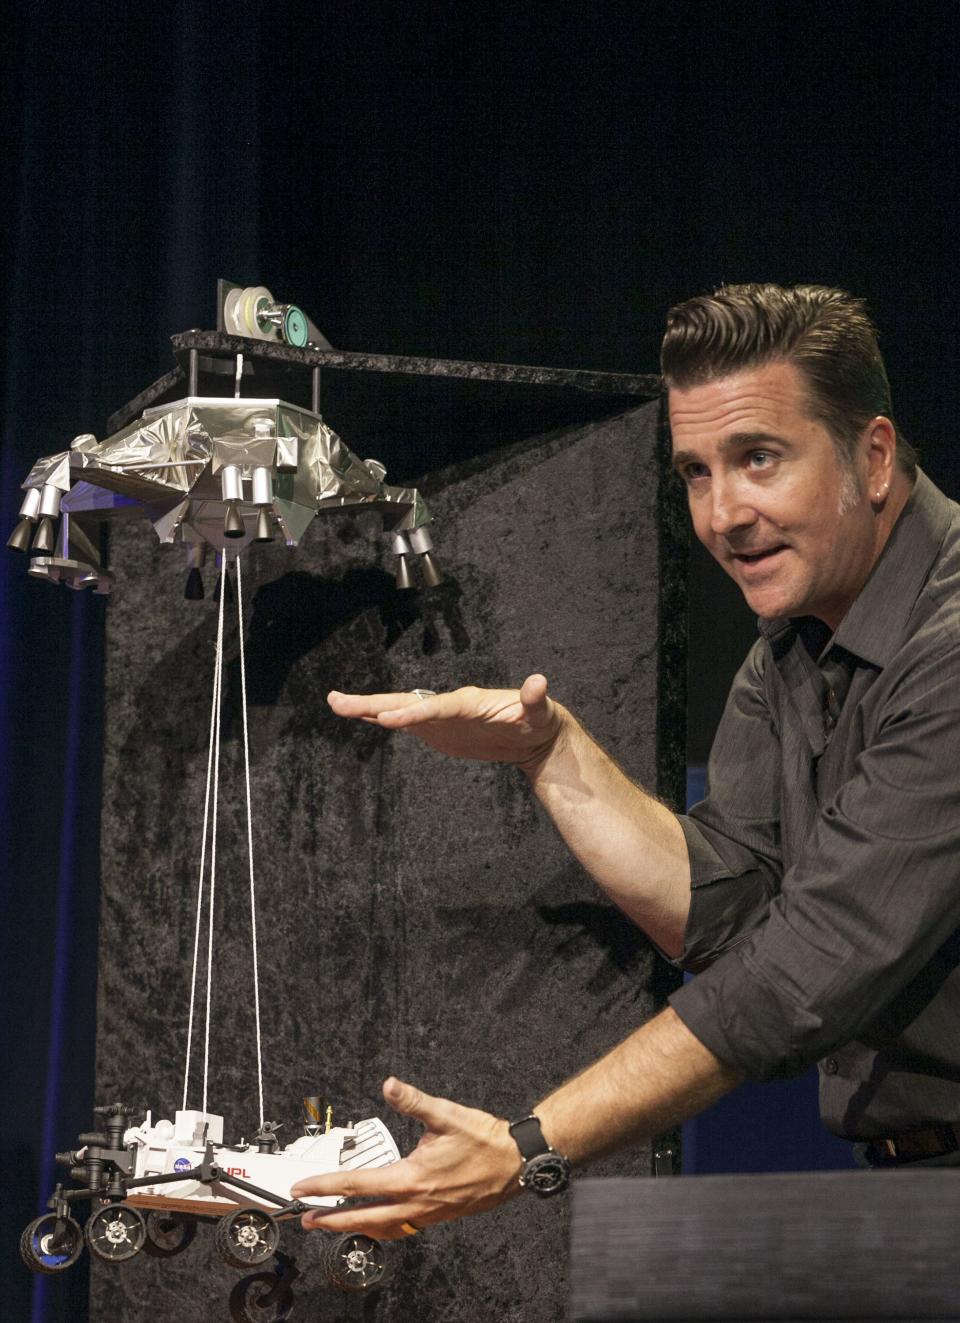 FILE - In this Thursday, Aug. 2, 2012 file photo, Adam Steltzner, Mars Science Laboratory's entry, descent and landing phase leader at JPL uses a scale model to explain the process for the Curiosity rover during news briefing at NASA's Jet Propulsion Laboratory in Pasadena, Calif. NASA's Curiosity rover is still on the move after six years, with more than 12 miles (20 kilometers) on its odometer. (AP Photo/Damian Dovarganes, File)